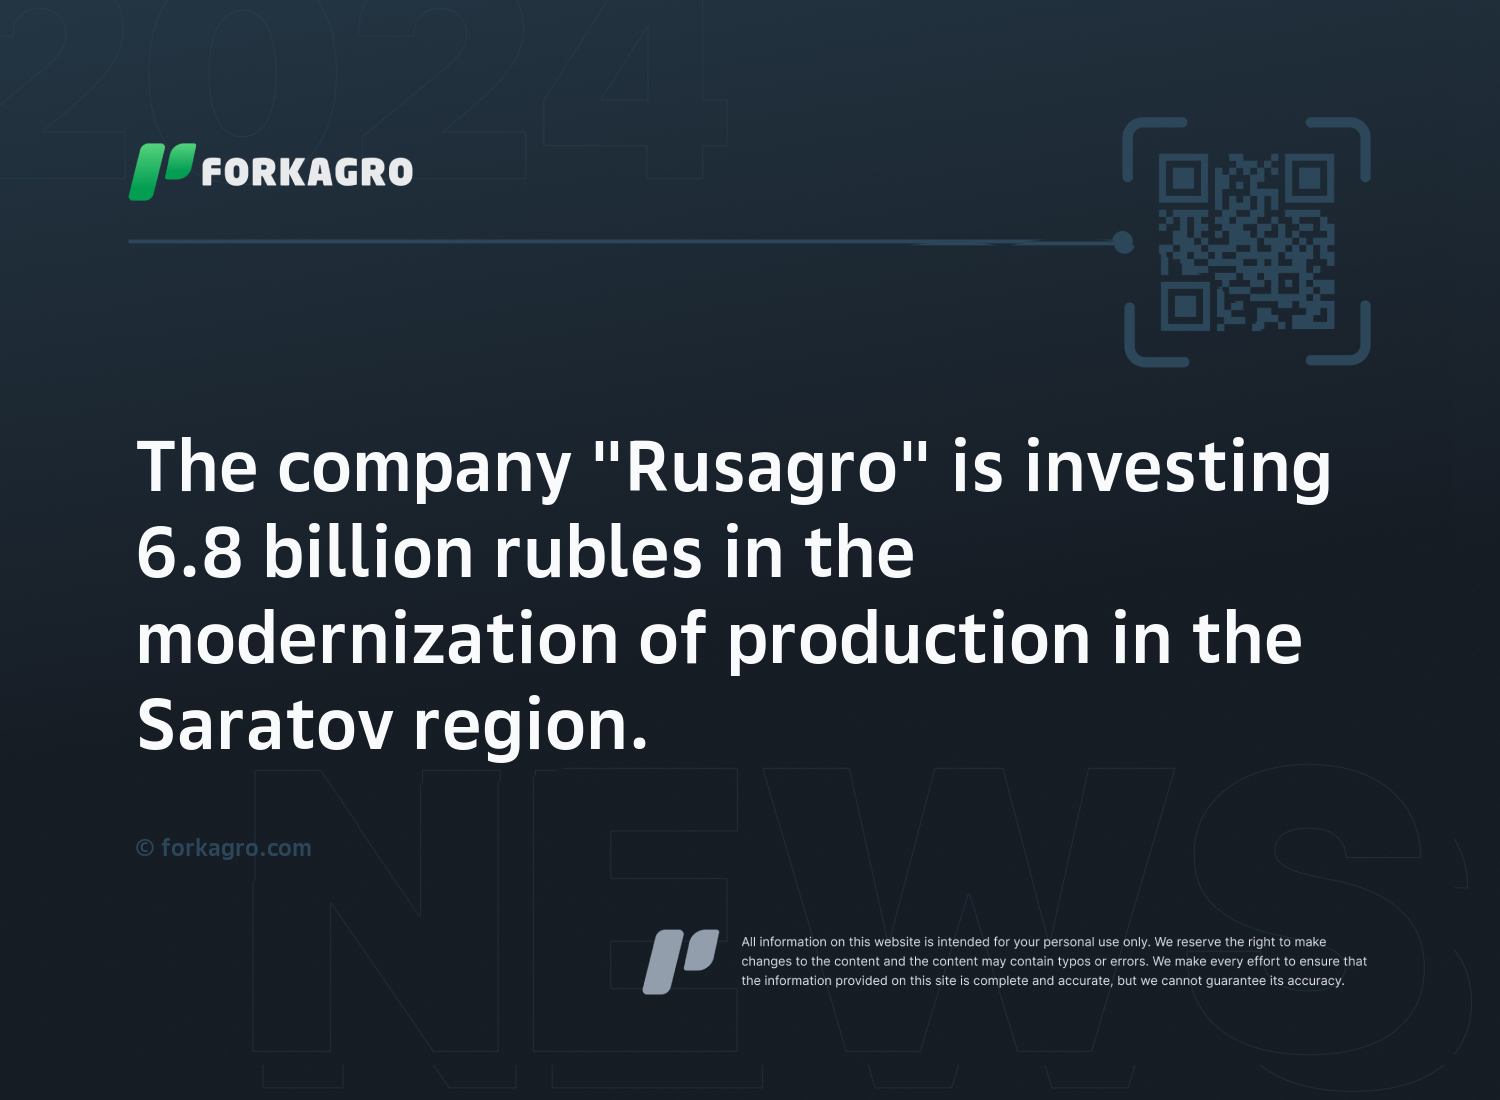 The company "Rusagro" is investing 6.8 billion rubles in the modernization of production in the Saratov region.